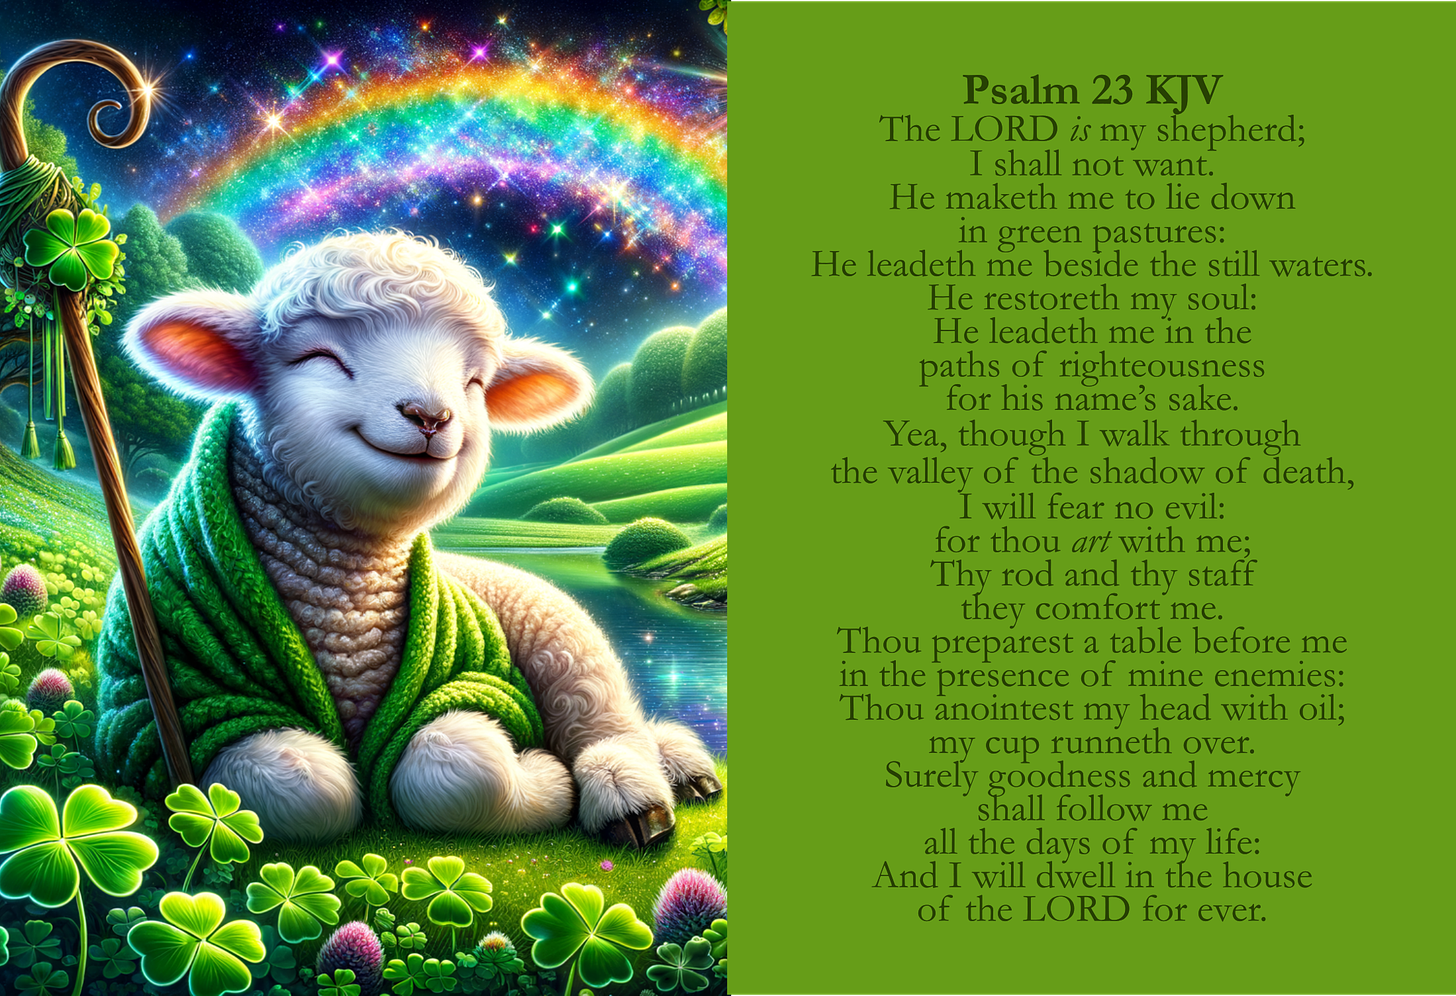 This is a vibrant and colorful digital artwork divided into two main sections. On the left, there is a whimsical, lush landscape with a smiling lamb at the forefront. The lamb is white with a very content and peaceful expression, and its eyes are closed as if it's savoring a moment of tranquility. It is wrapped in a green garment with a texture resembling leaves or petals, blending seamlessly with the verdant environment. The landscape behind the lamb features rolling green hills, a serene river, and abundant foliage including clovers and round, purple flowers. The sky above is not typical; it is filled with a brilliant, cosmic array of stars and nebulae forming a rainbow across the heavens, suggesting a blending of day and night, or earthly and celestial realms.  On the right, there is a solid green background, and superimposed upon it is the text of Psalm 23 from the King James Version (KJV) of the Bible. The text is arranged in a block with ample spacing, in a serif font that is easy to read. It is colored in a shade of yellow that provides a stark contrast against the green, ensuring legibility. The text shares themes of guidance, comfort, and divine presence that are metaphorically represented in the serene image of the lamb to the left. The overall impression is one of peace, safety, and spiritual well-being.